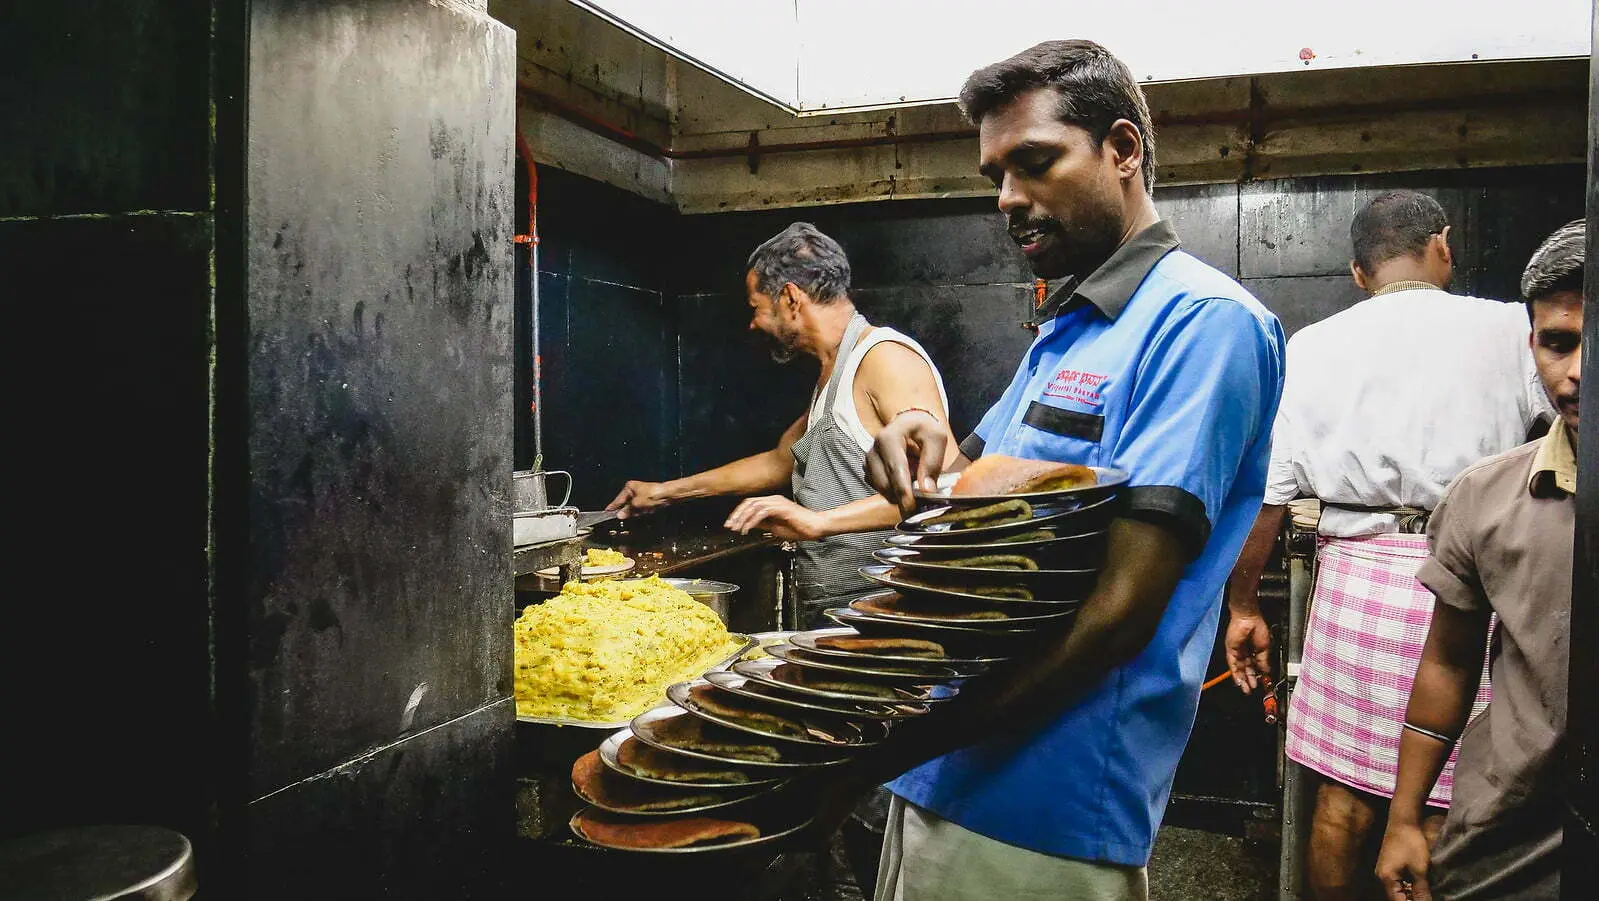 Return stacking dosas while traveling in India